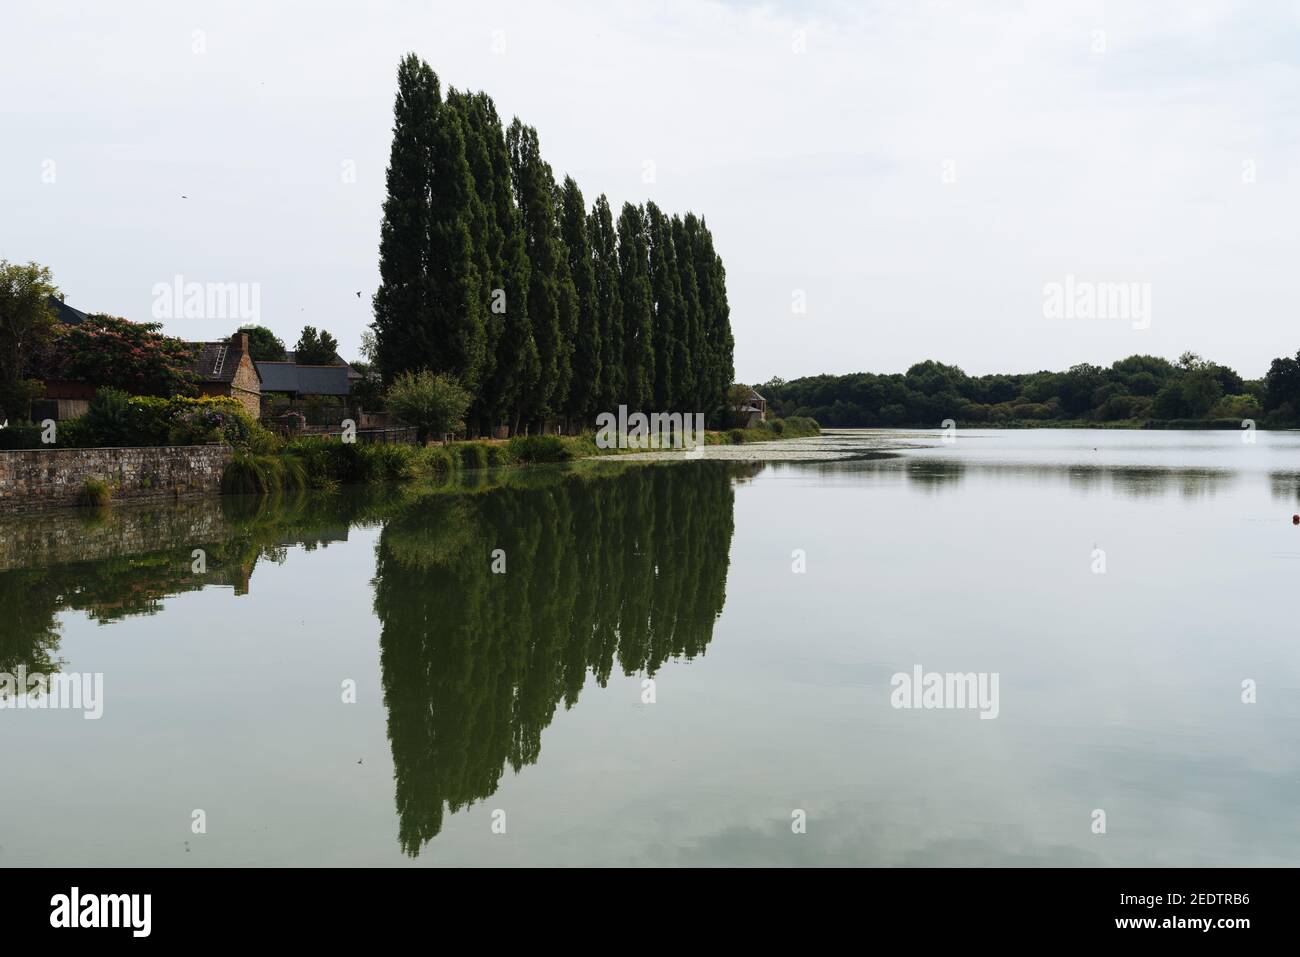 Row of poplars reflecting on the lake of Combourg, French Brittany Stock Photo